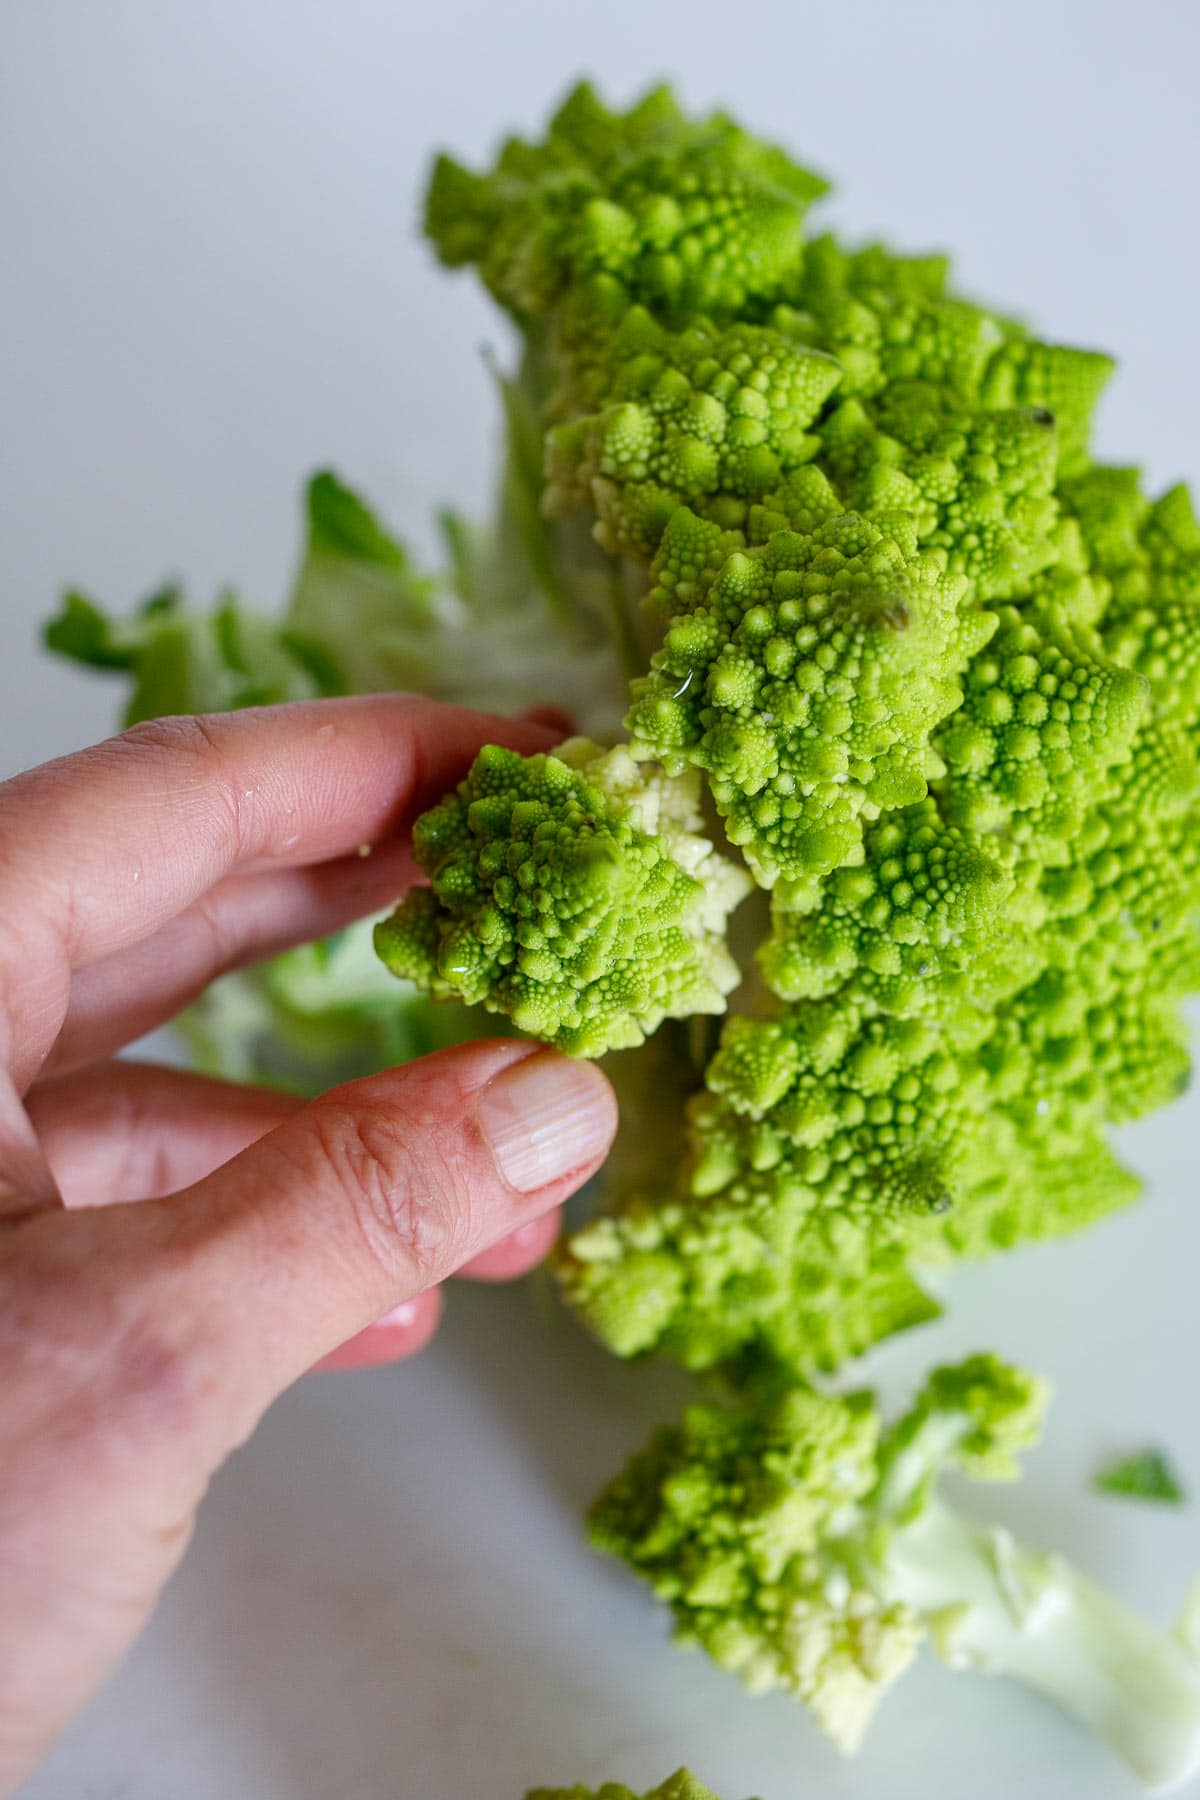 Prepping romanesco, pulling off the spires.